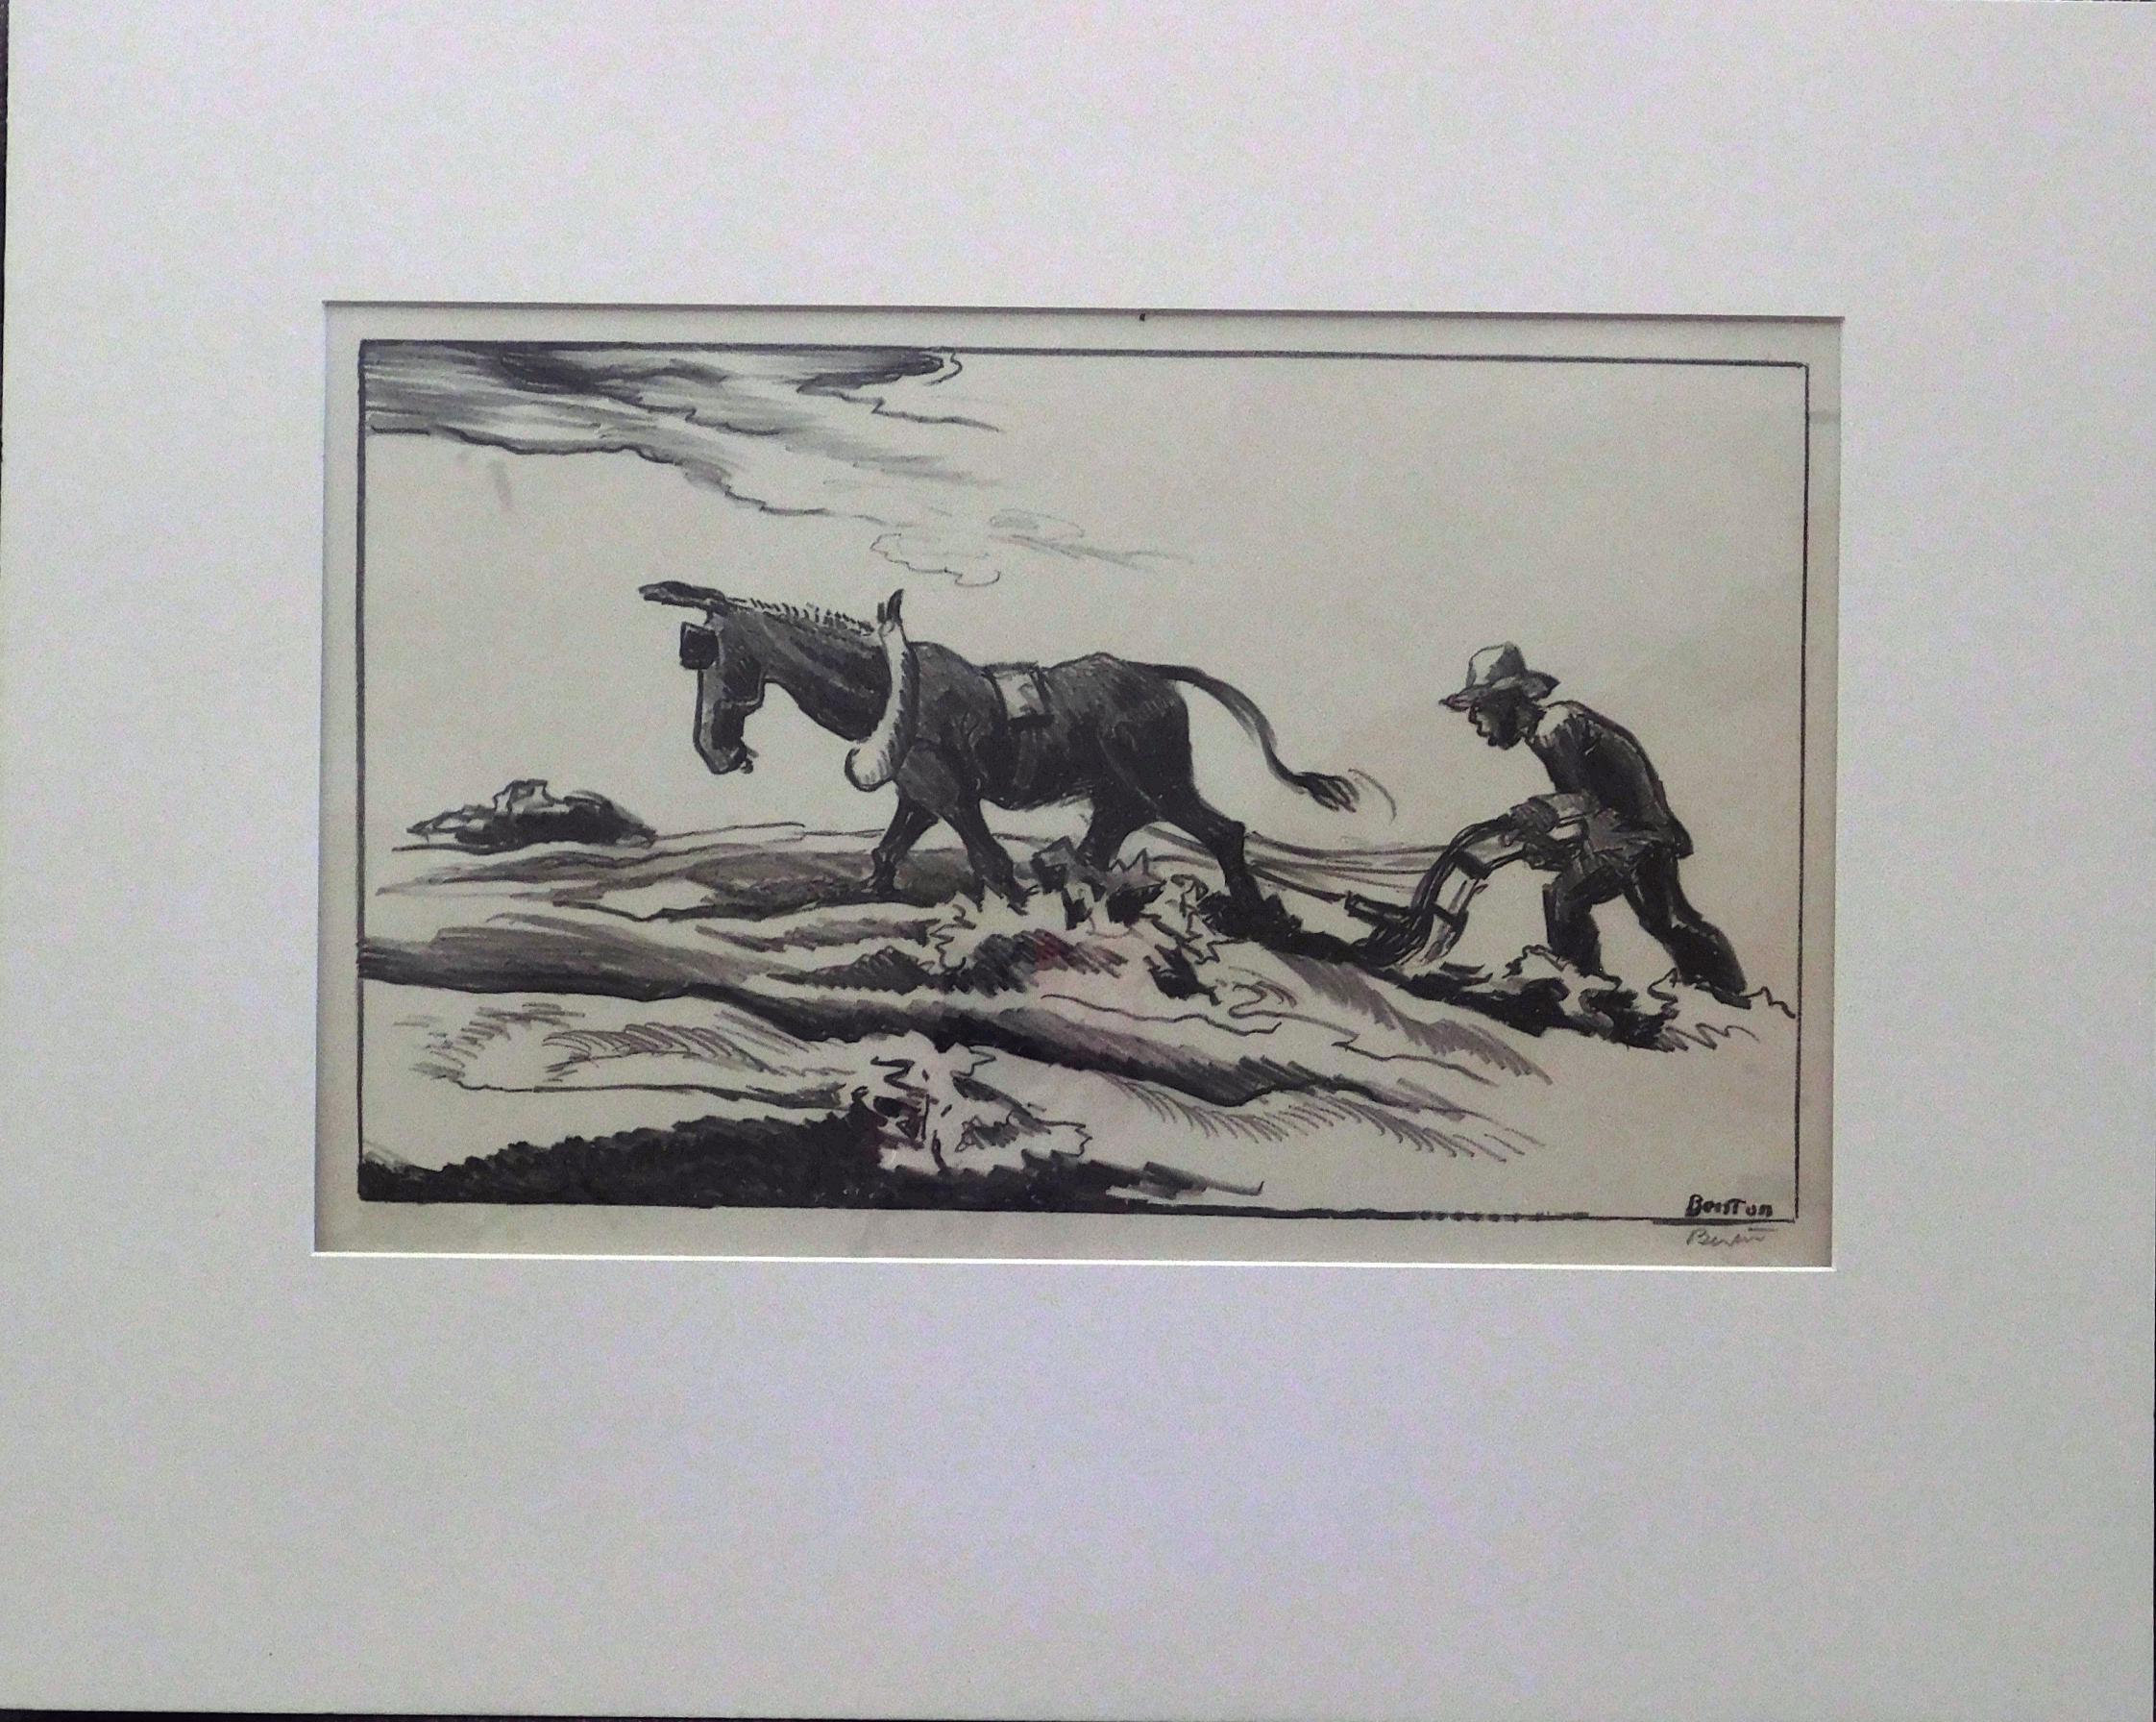 Thomas Hart Benton (1889-1975) Original stone lithograph.
Title: Plowing it Under (also Ploughing), 1934. 
Unframed and presents in a 4 ply museum mat.
Image size: 8